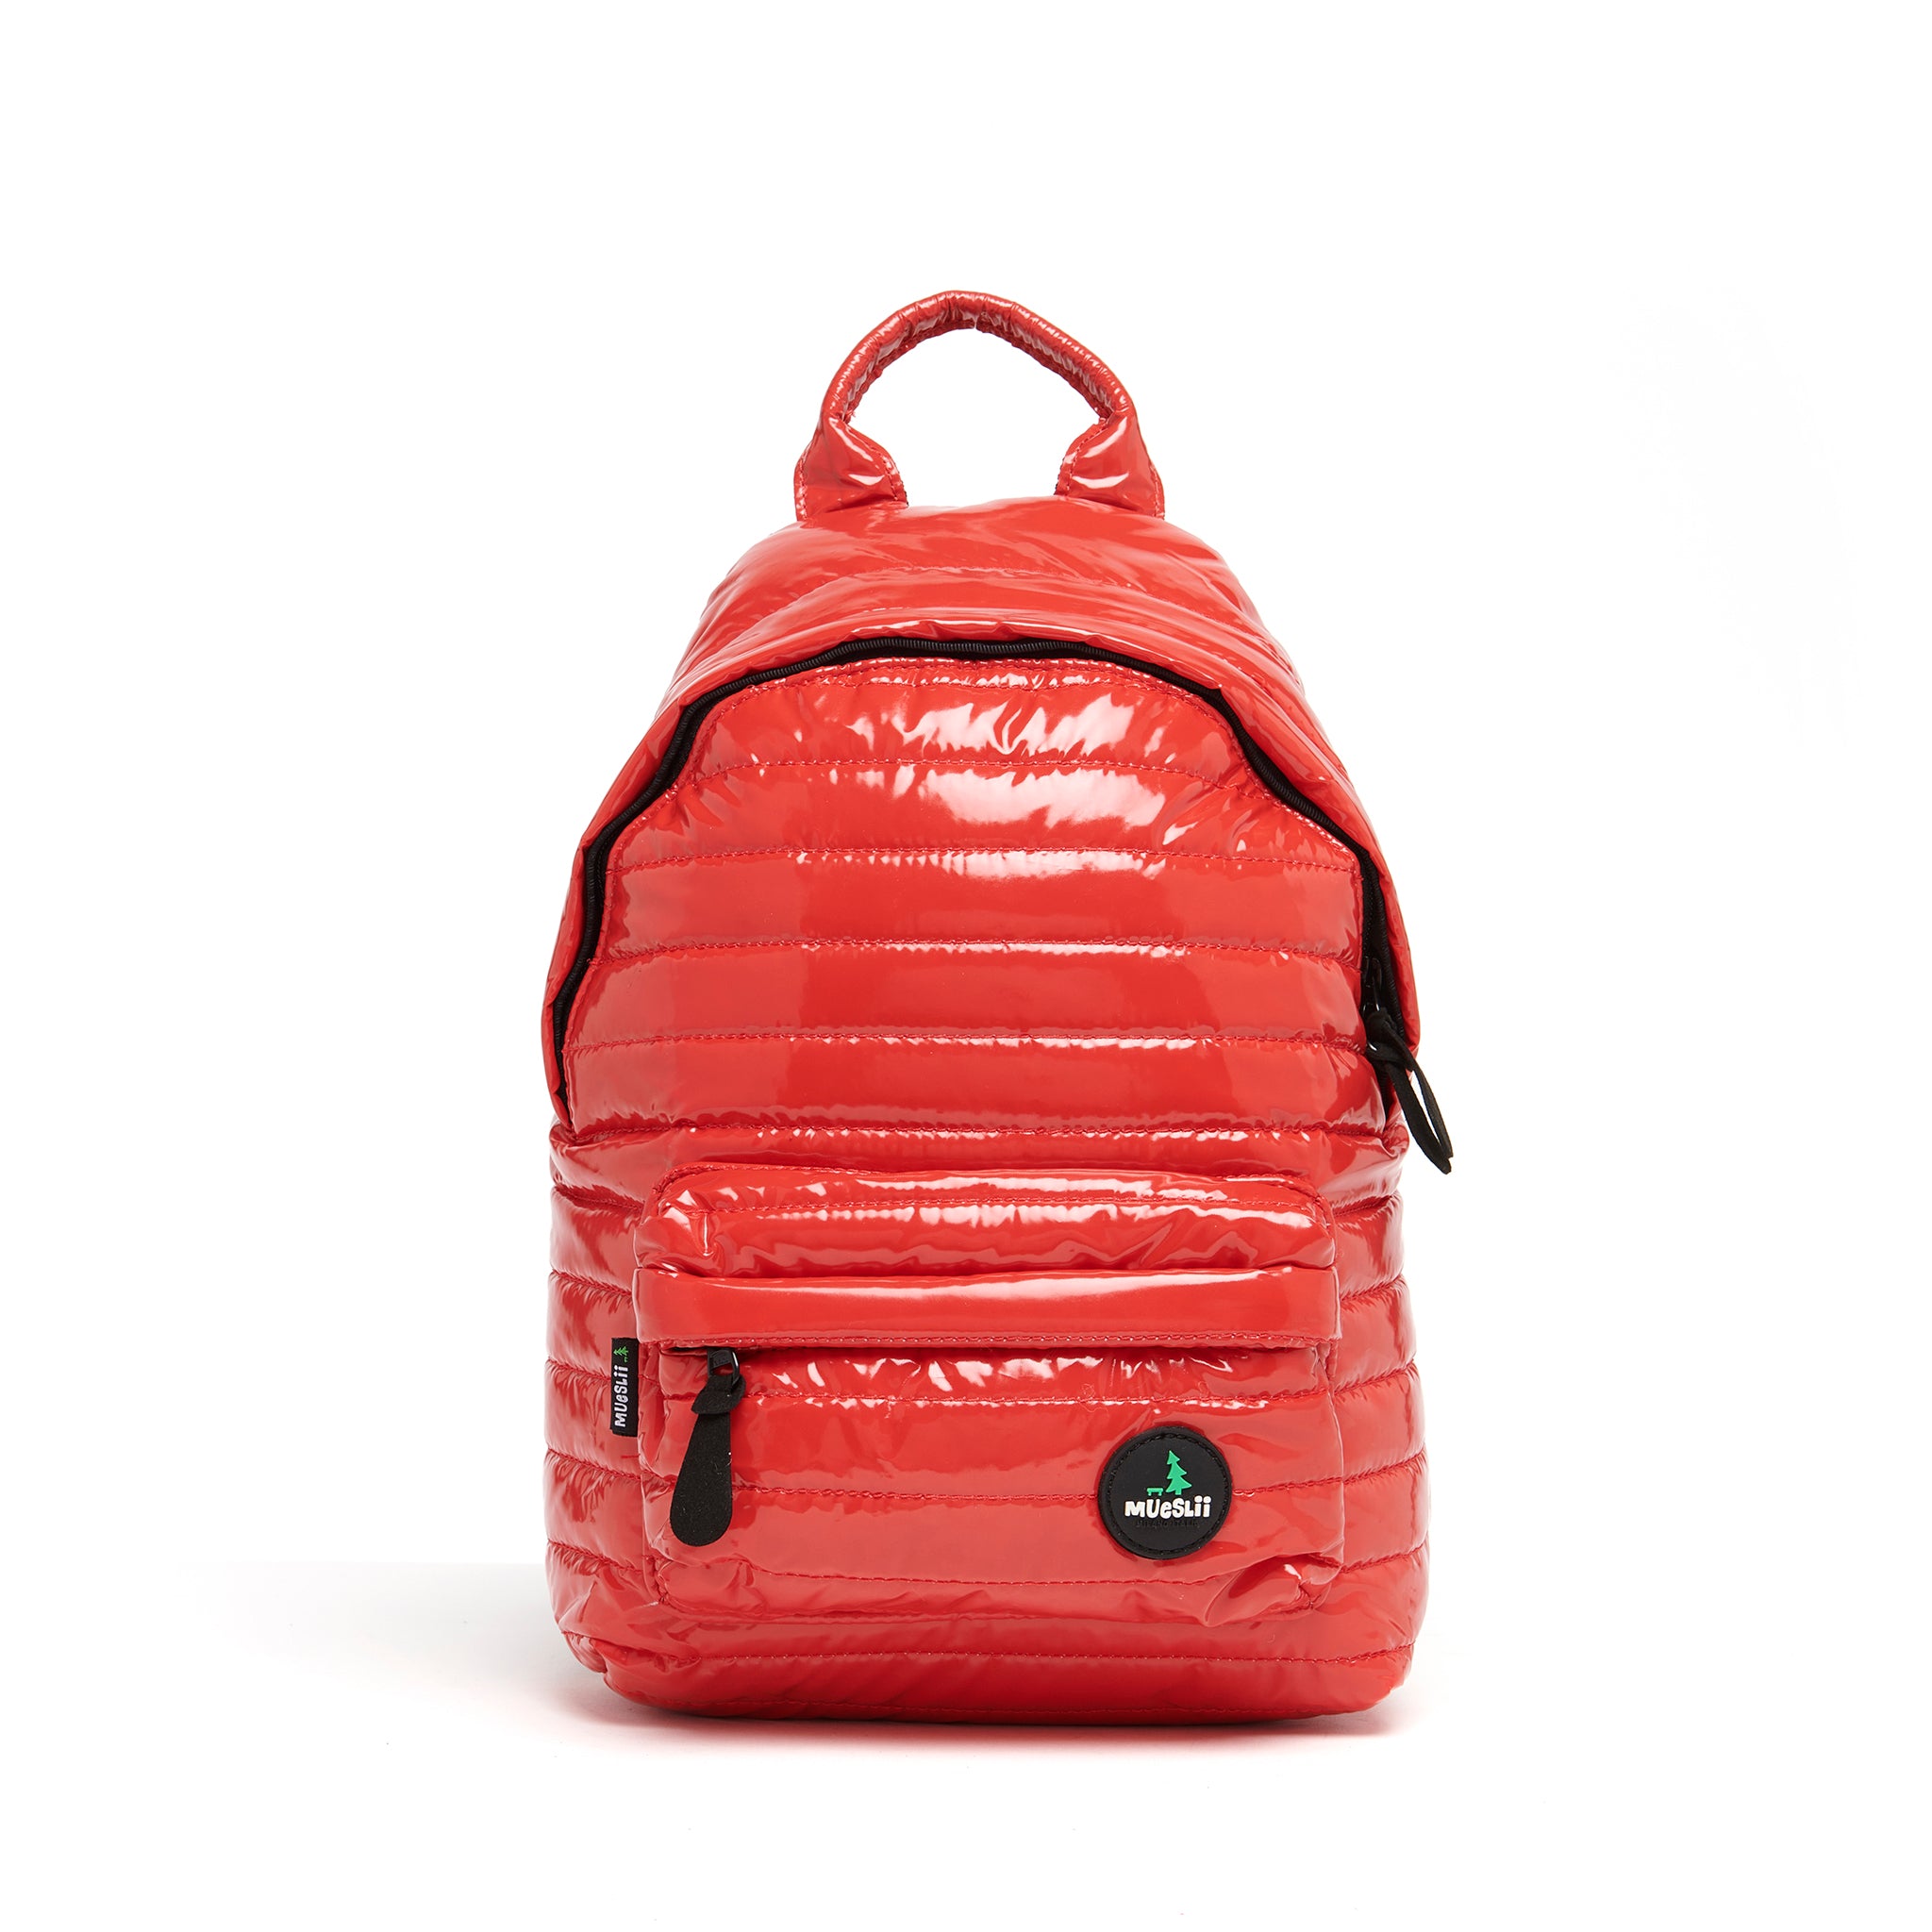 Mueslii original puffer medium and small backpack made of metal coated nylon and Ykk zips, color metal red, front view.